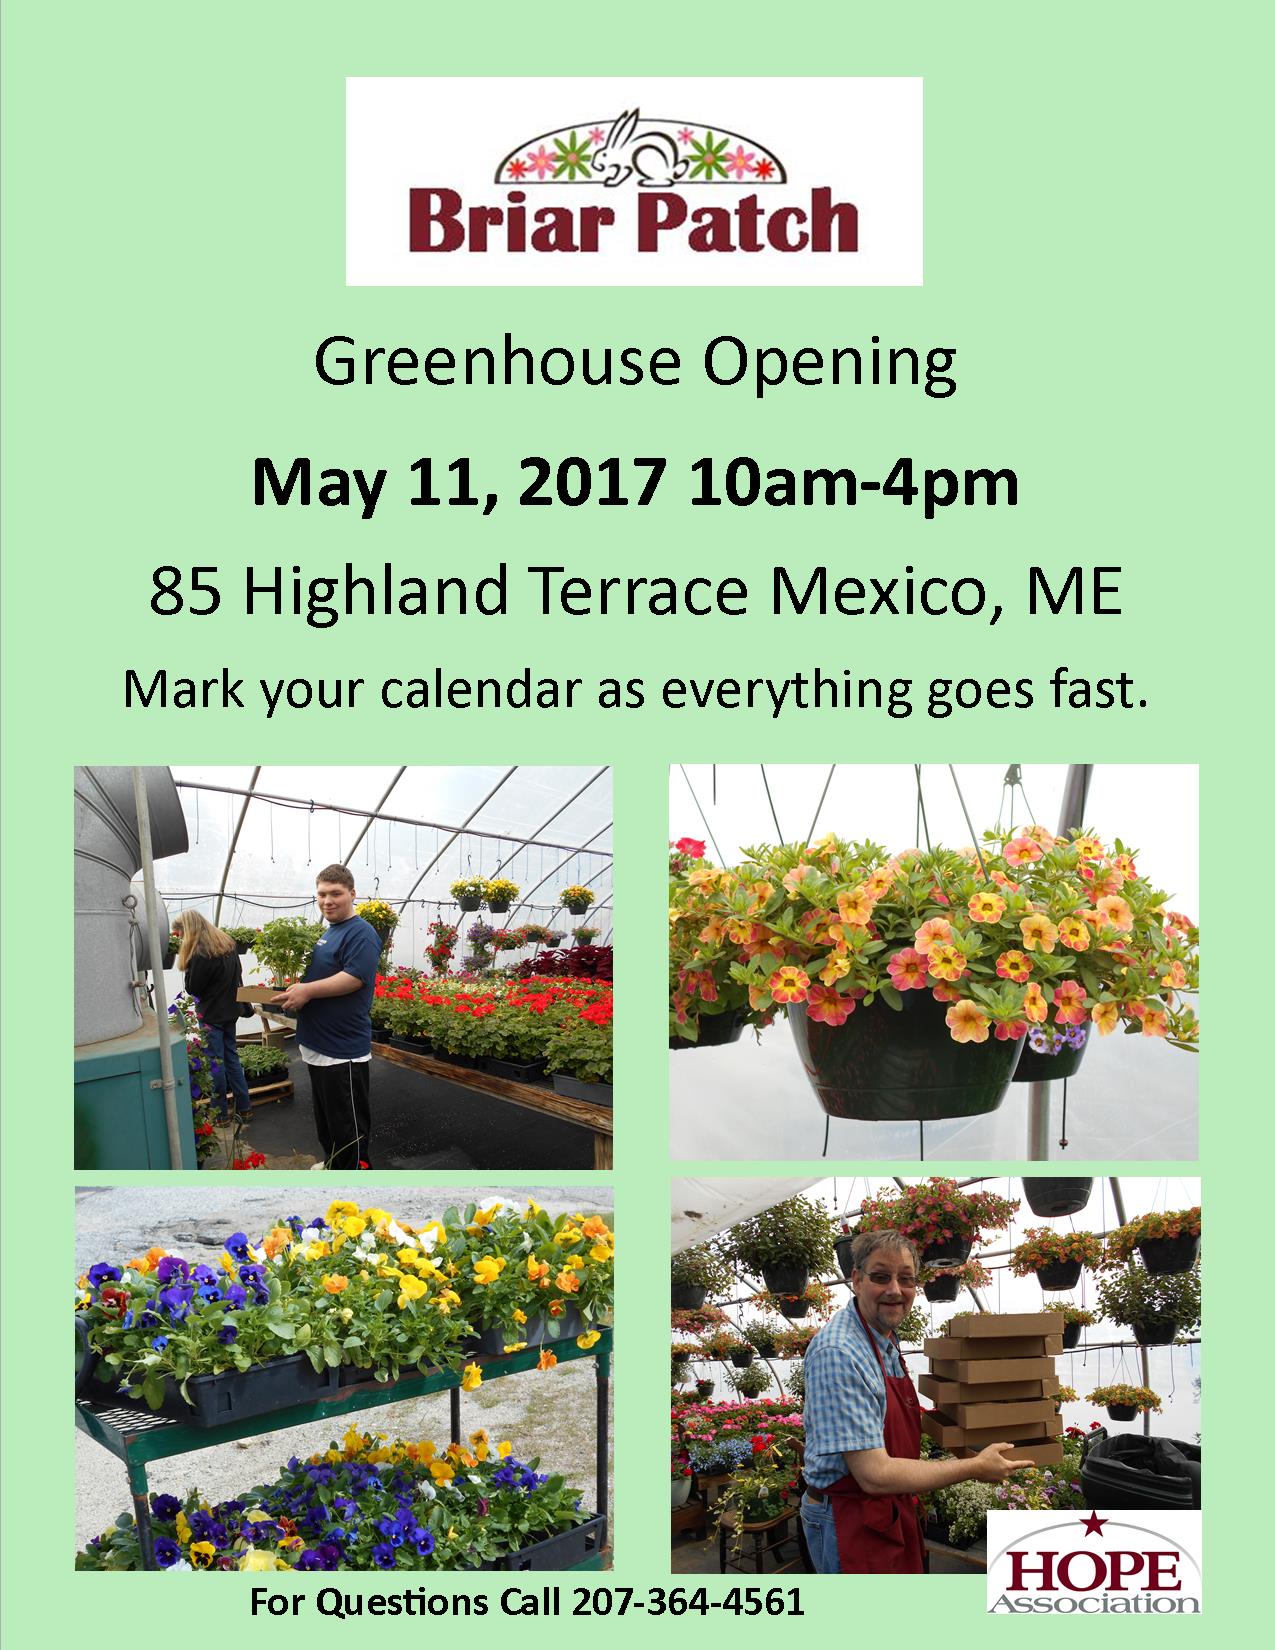 Briar Patch Greenhouse Opening by Hope Association